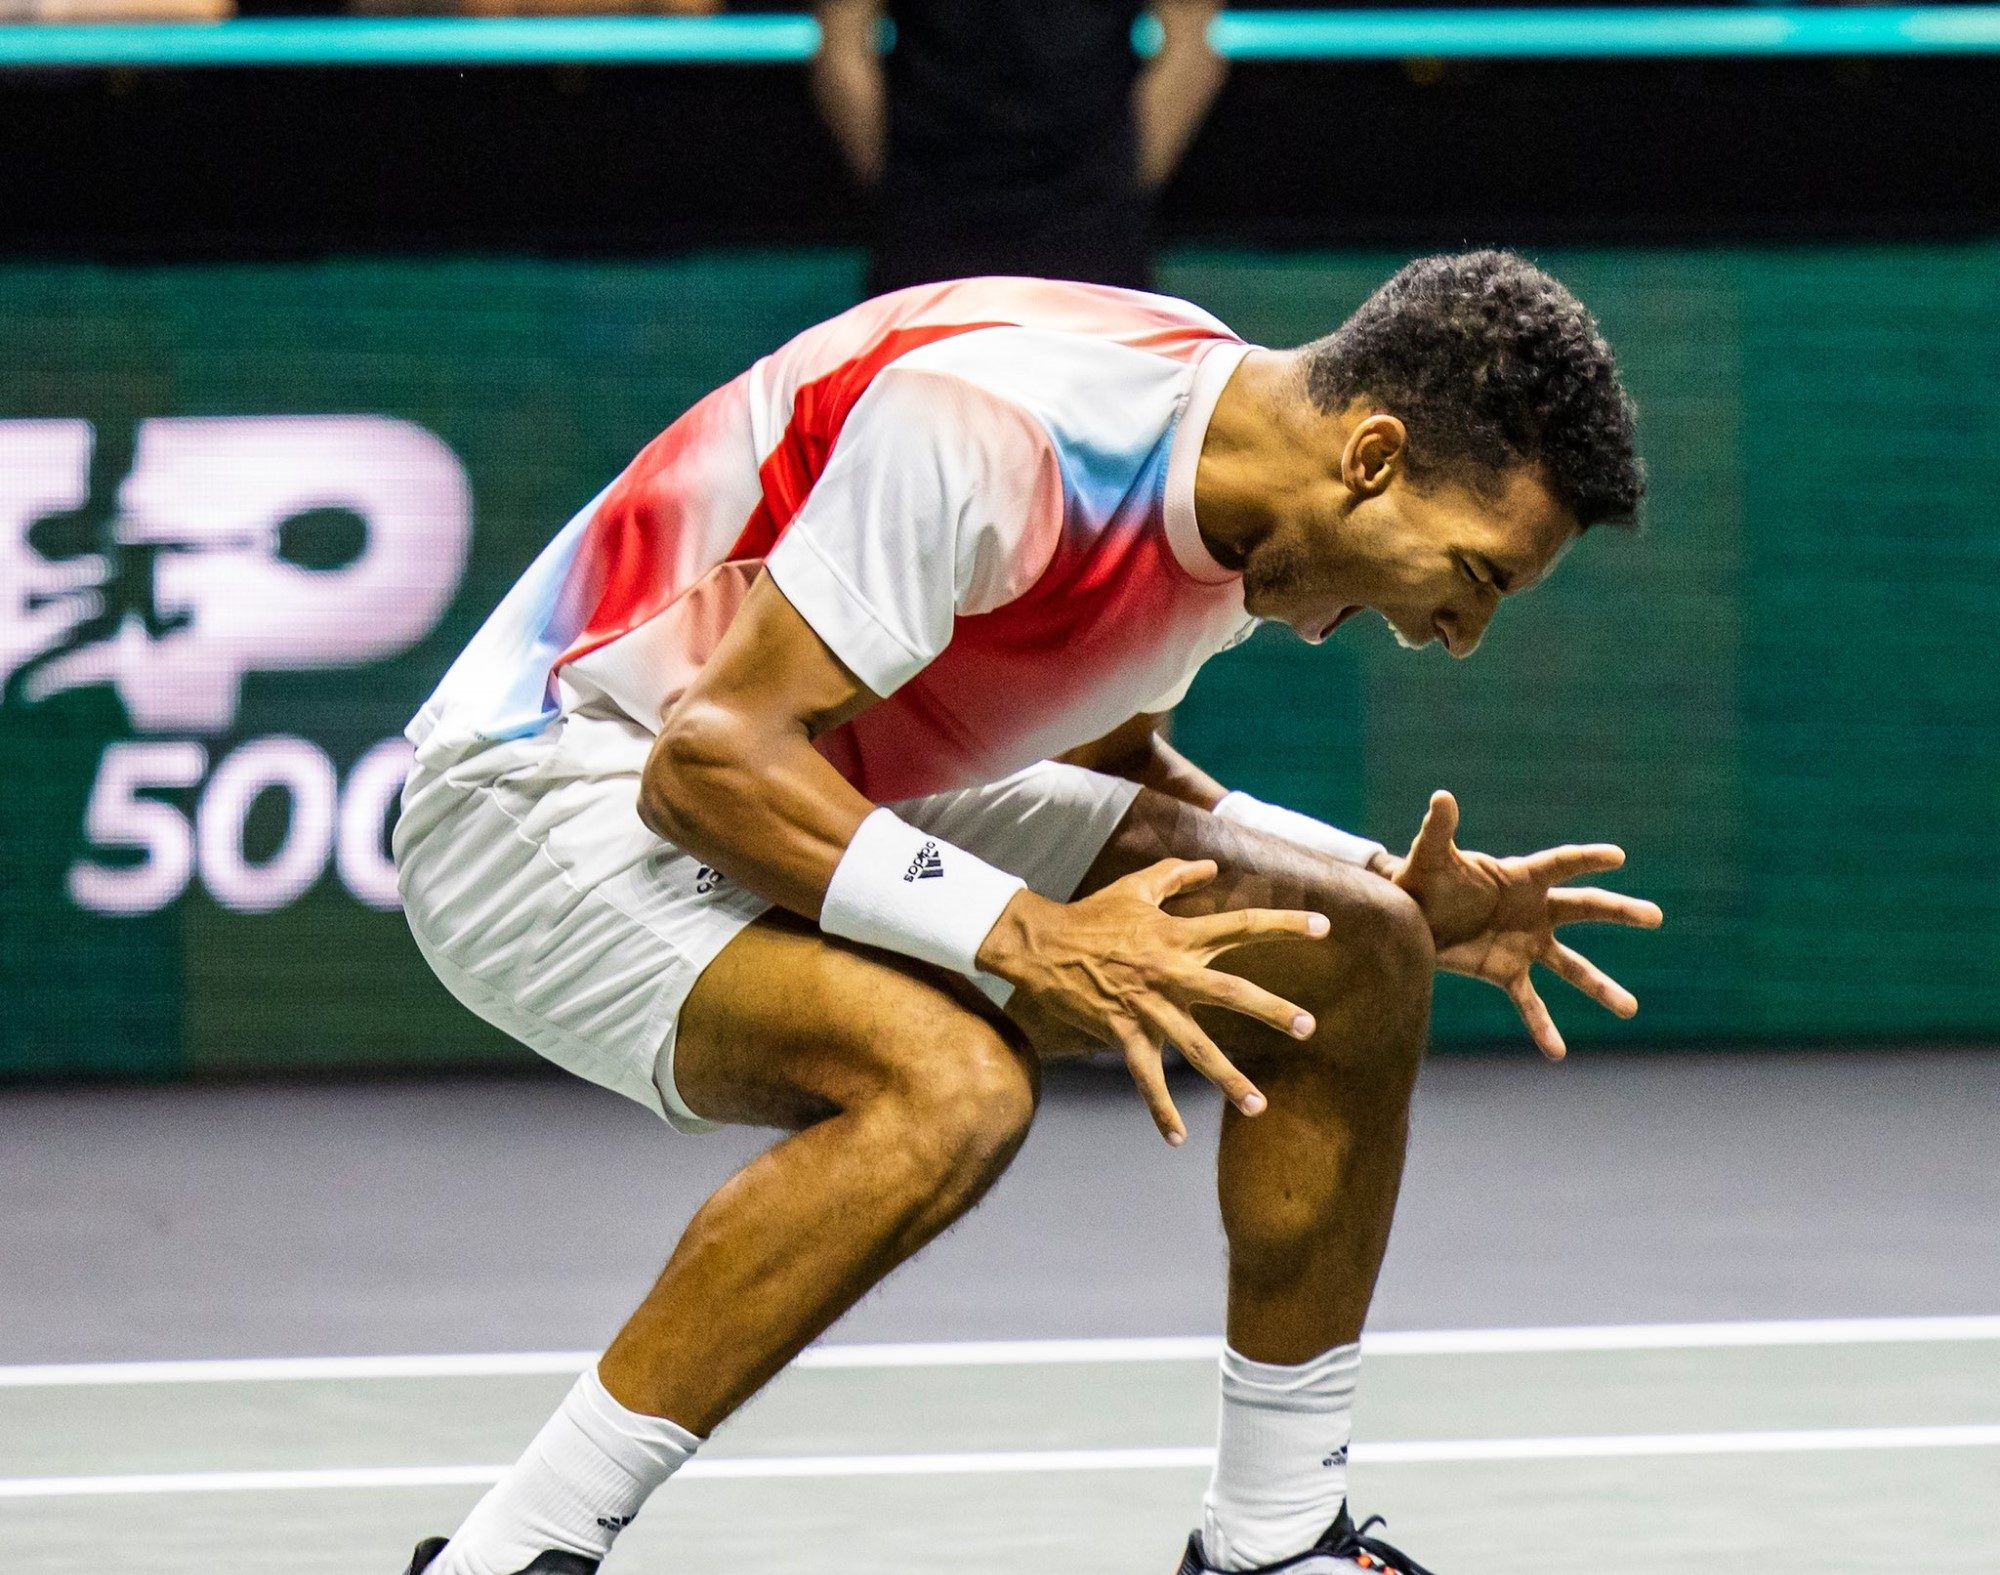 The wait is over Félix Auger-Aliassime captures his first ATP Title